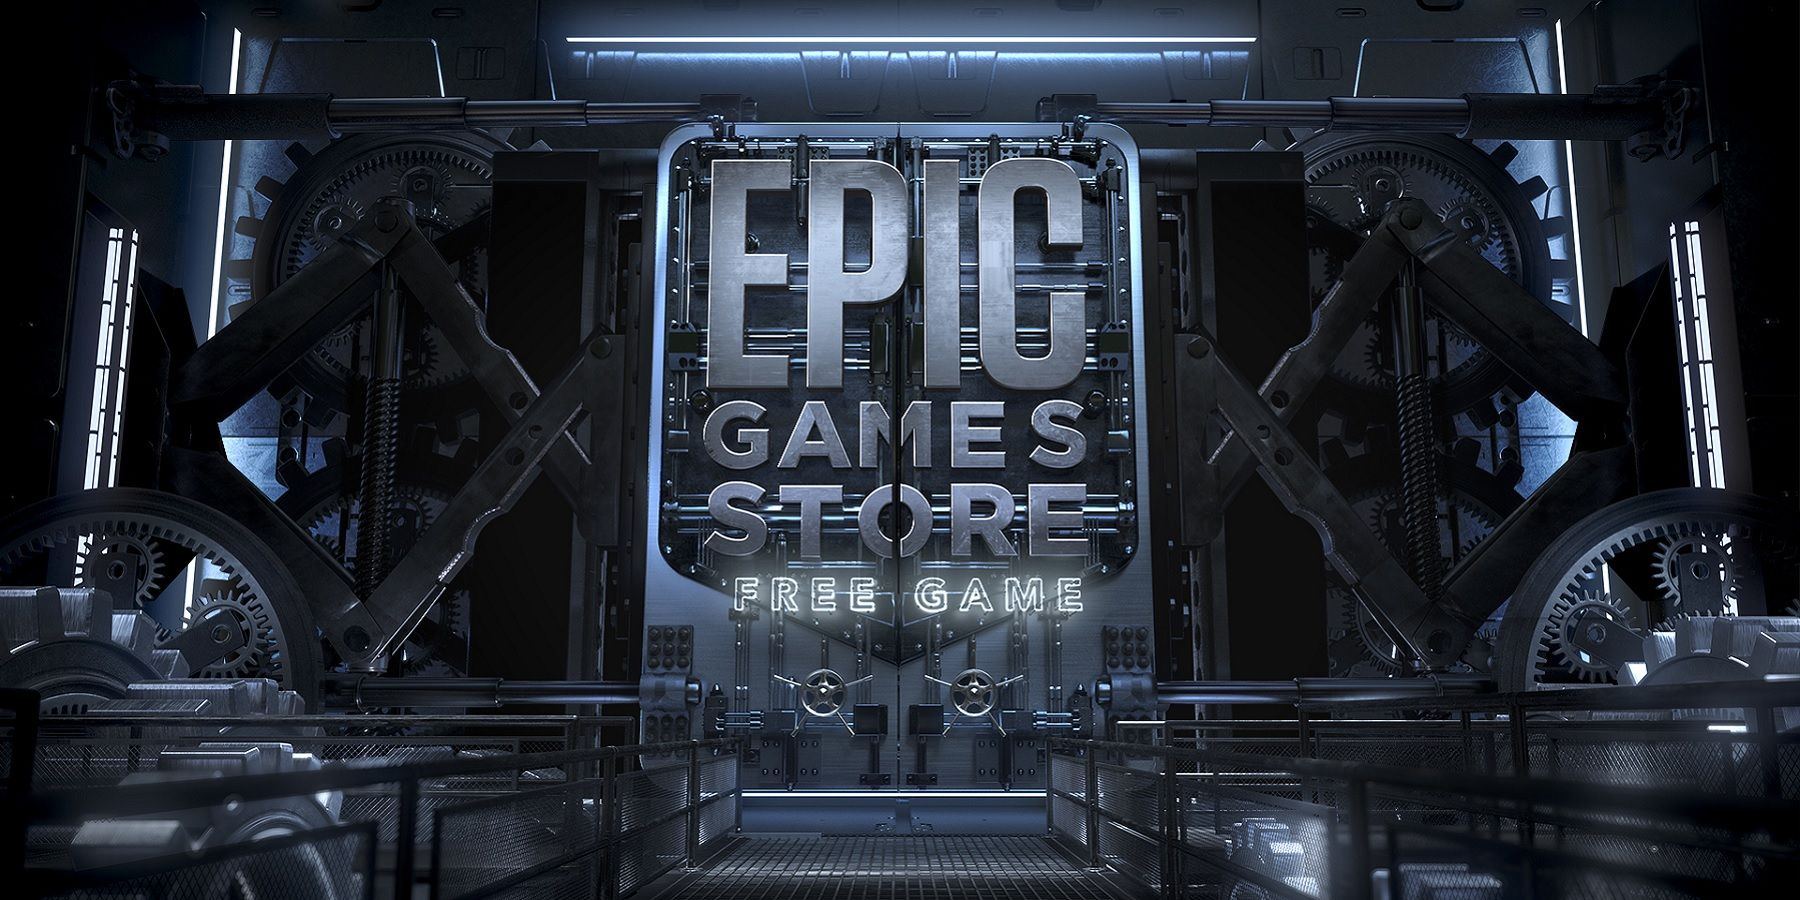 Epic Games Free Game For August 24 Revealed! - HIGH ON CINEMA